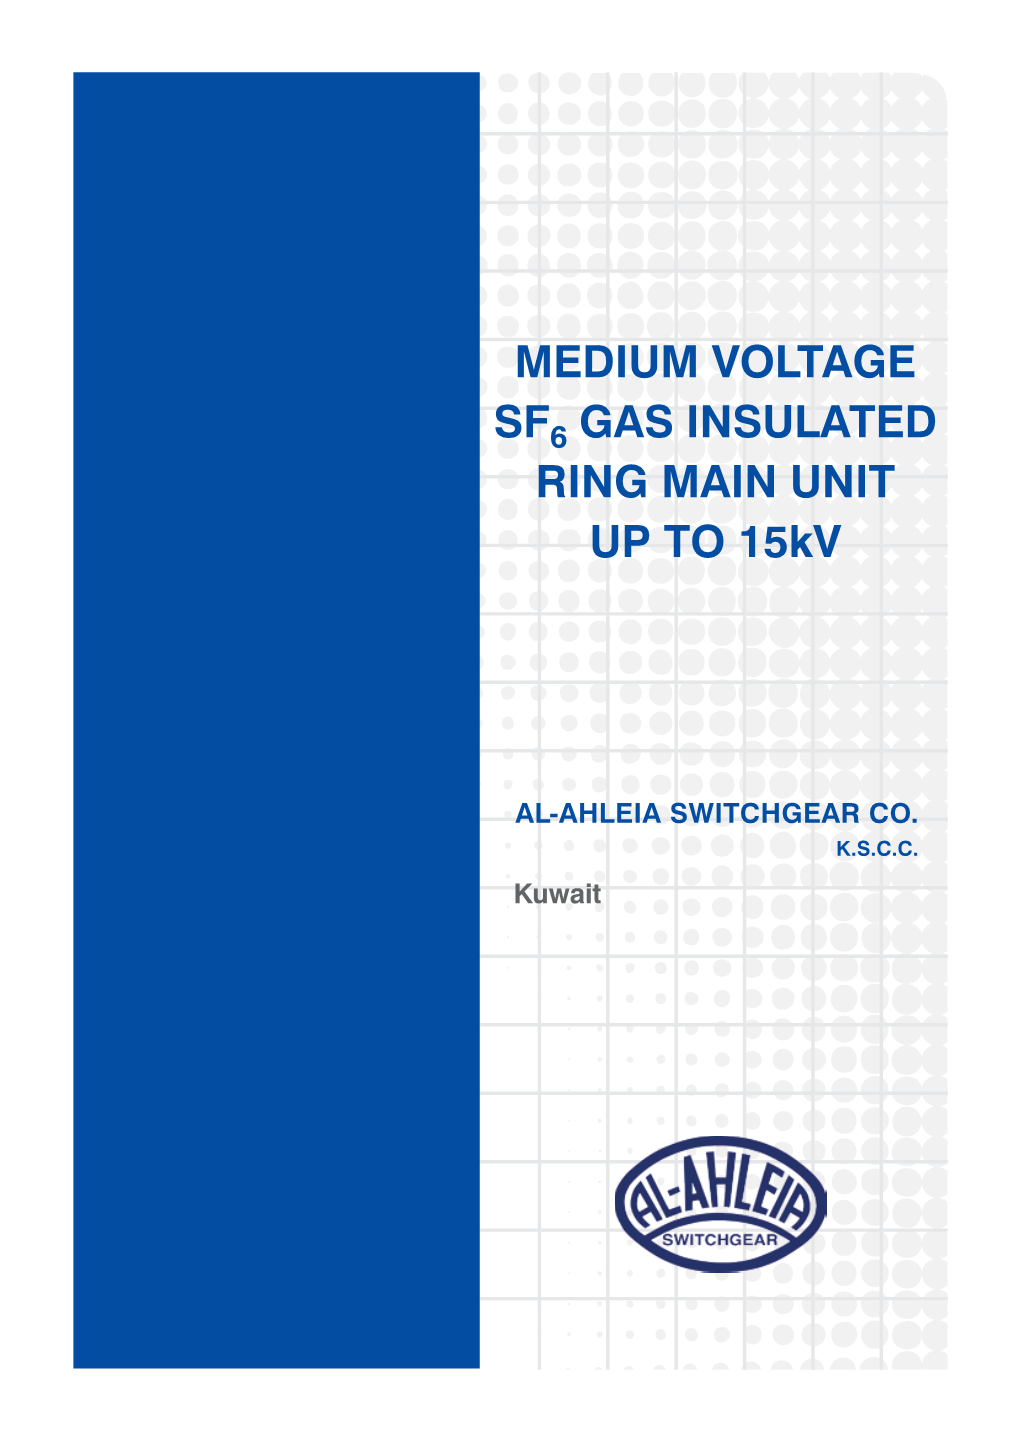 Medium Voltage Sf6 Gas Insulated Ring Main Unit Up